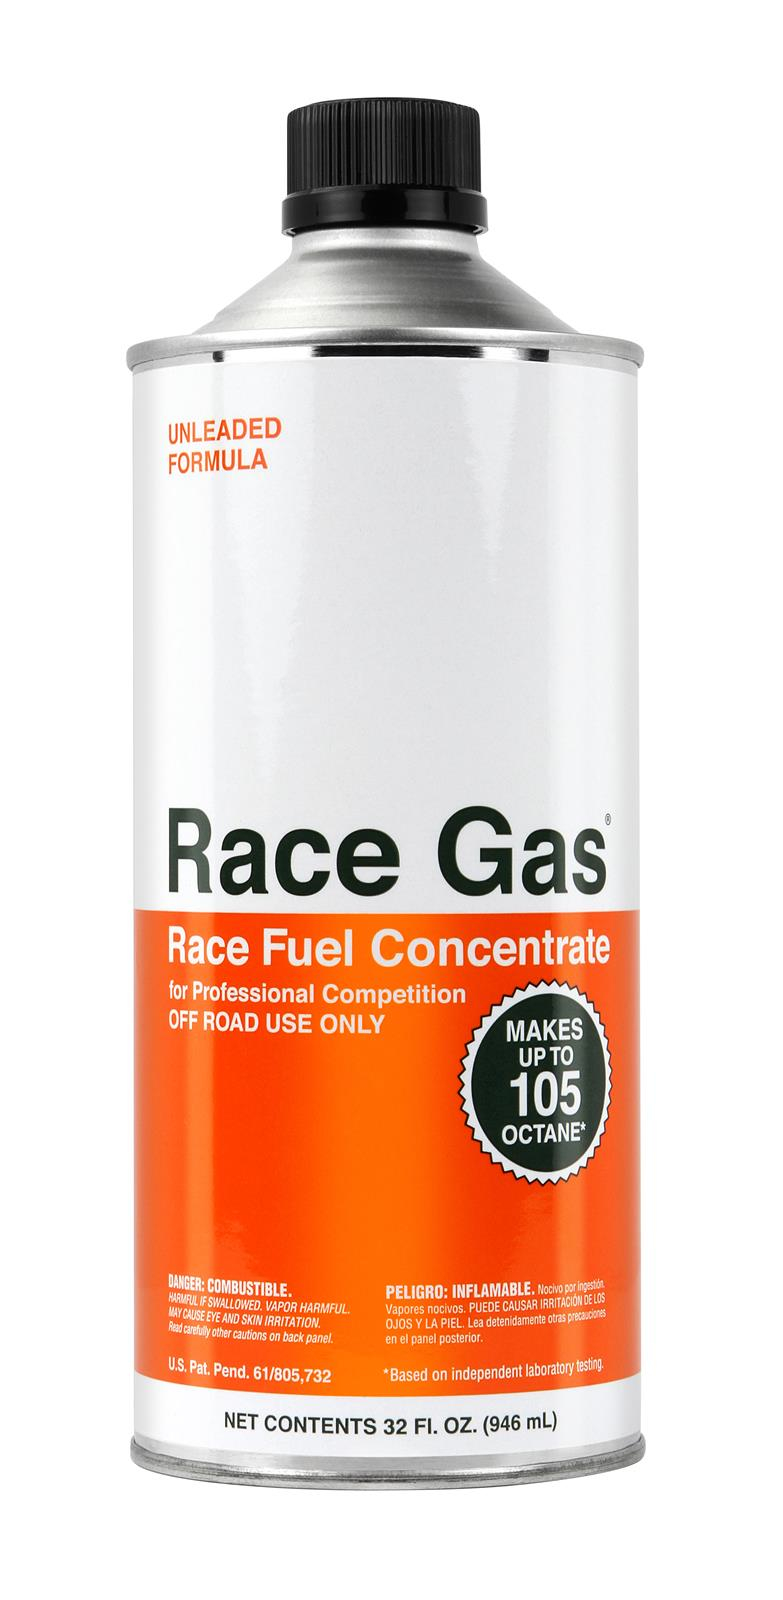 Race Gas Fuel Concentrate